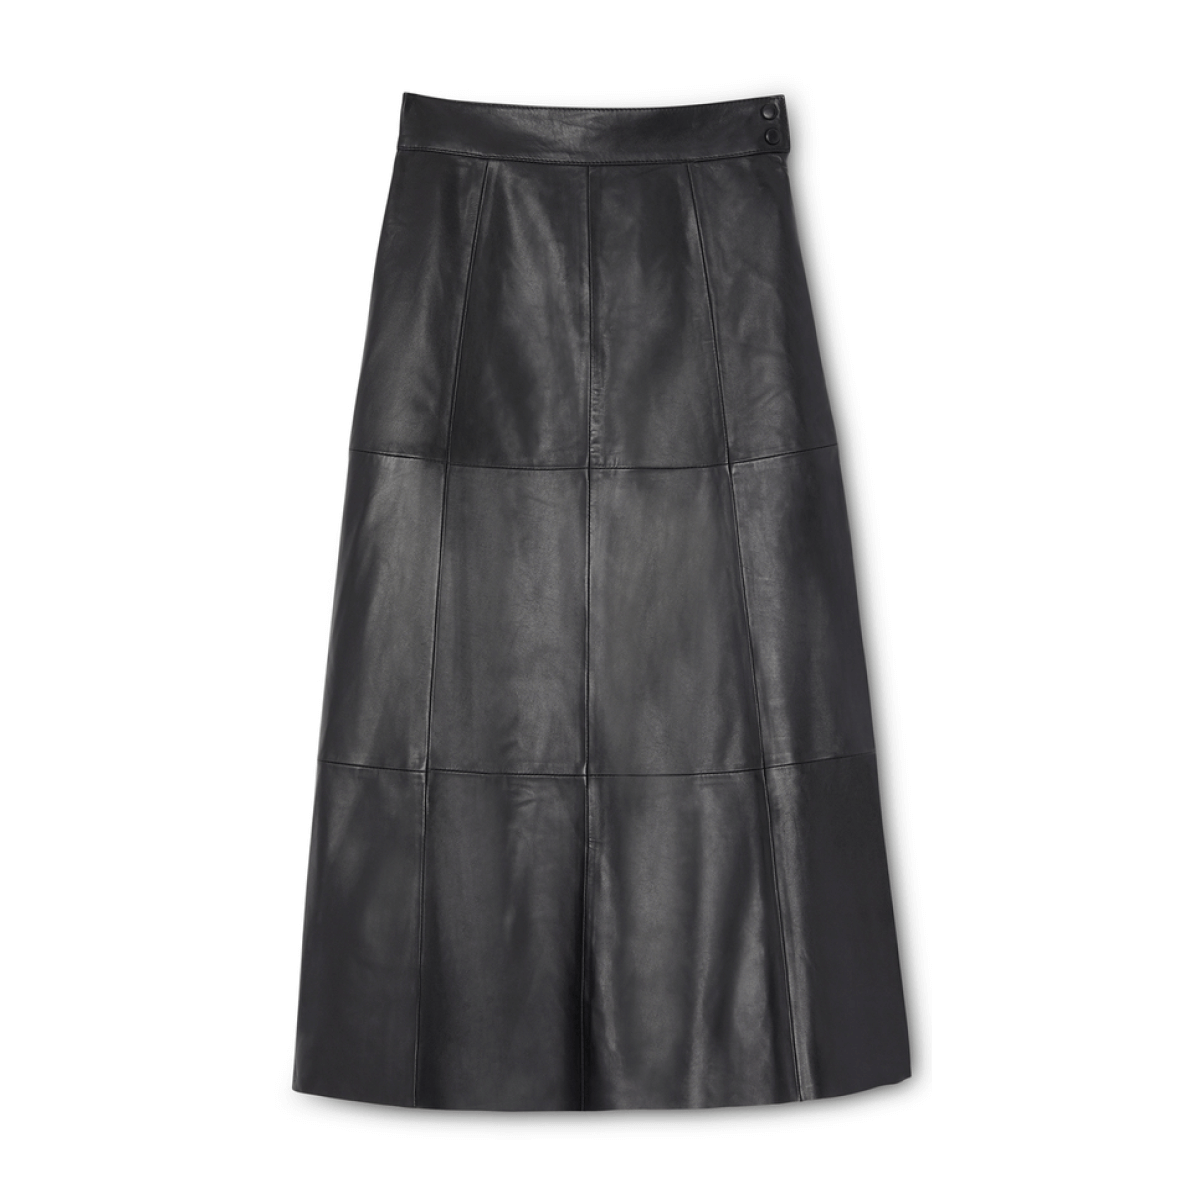 G. Label marilyn midlength leather skirt